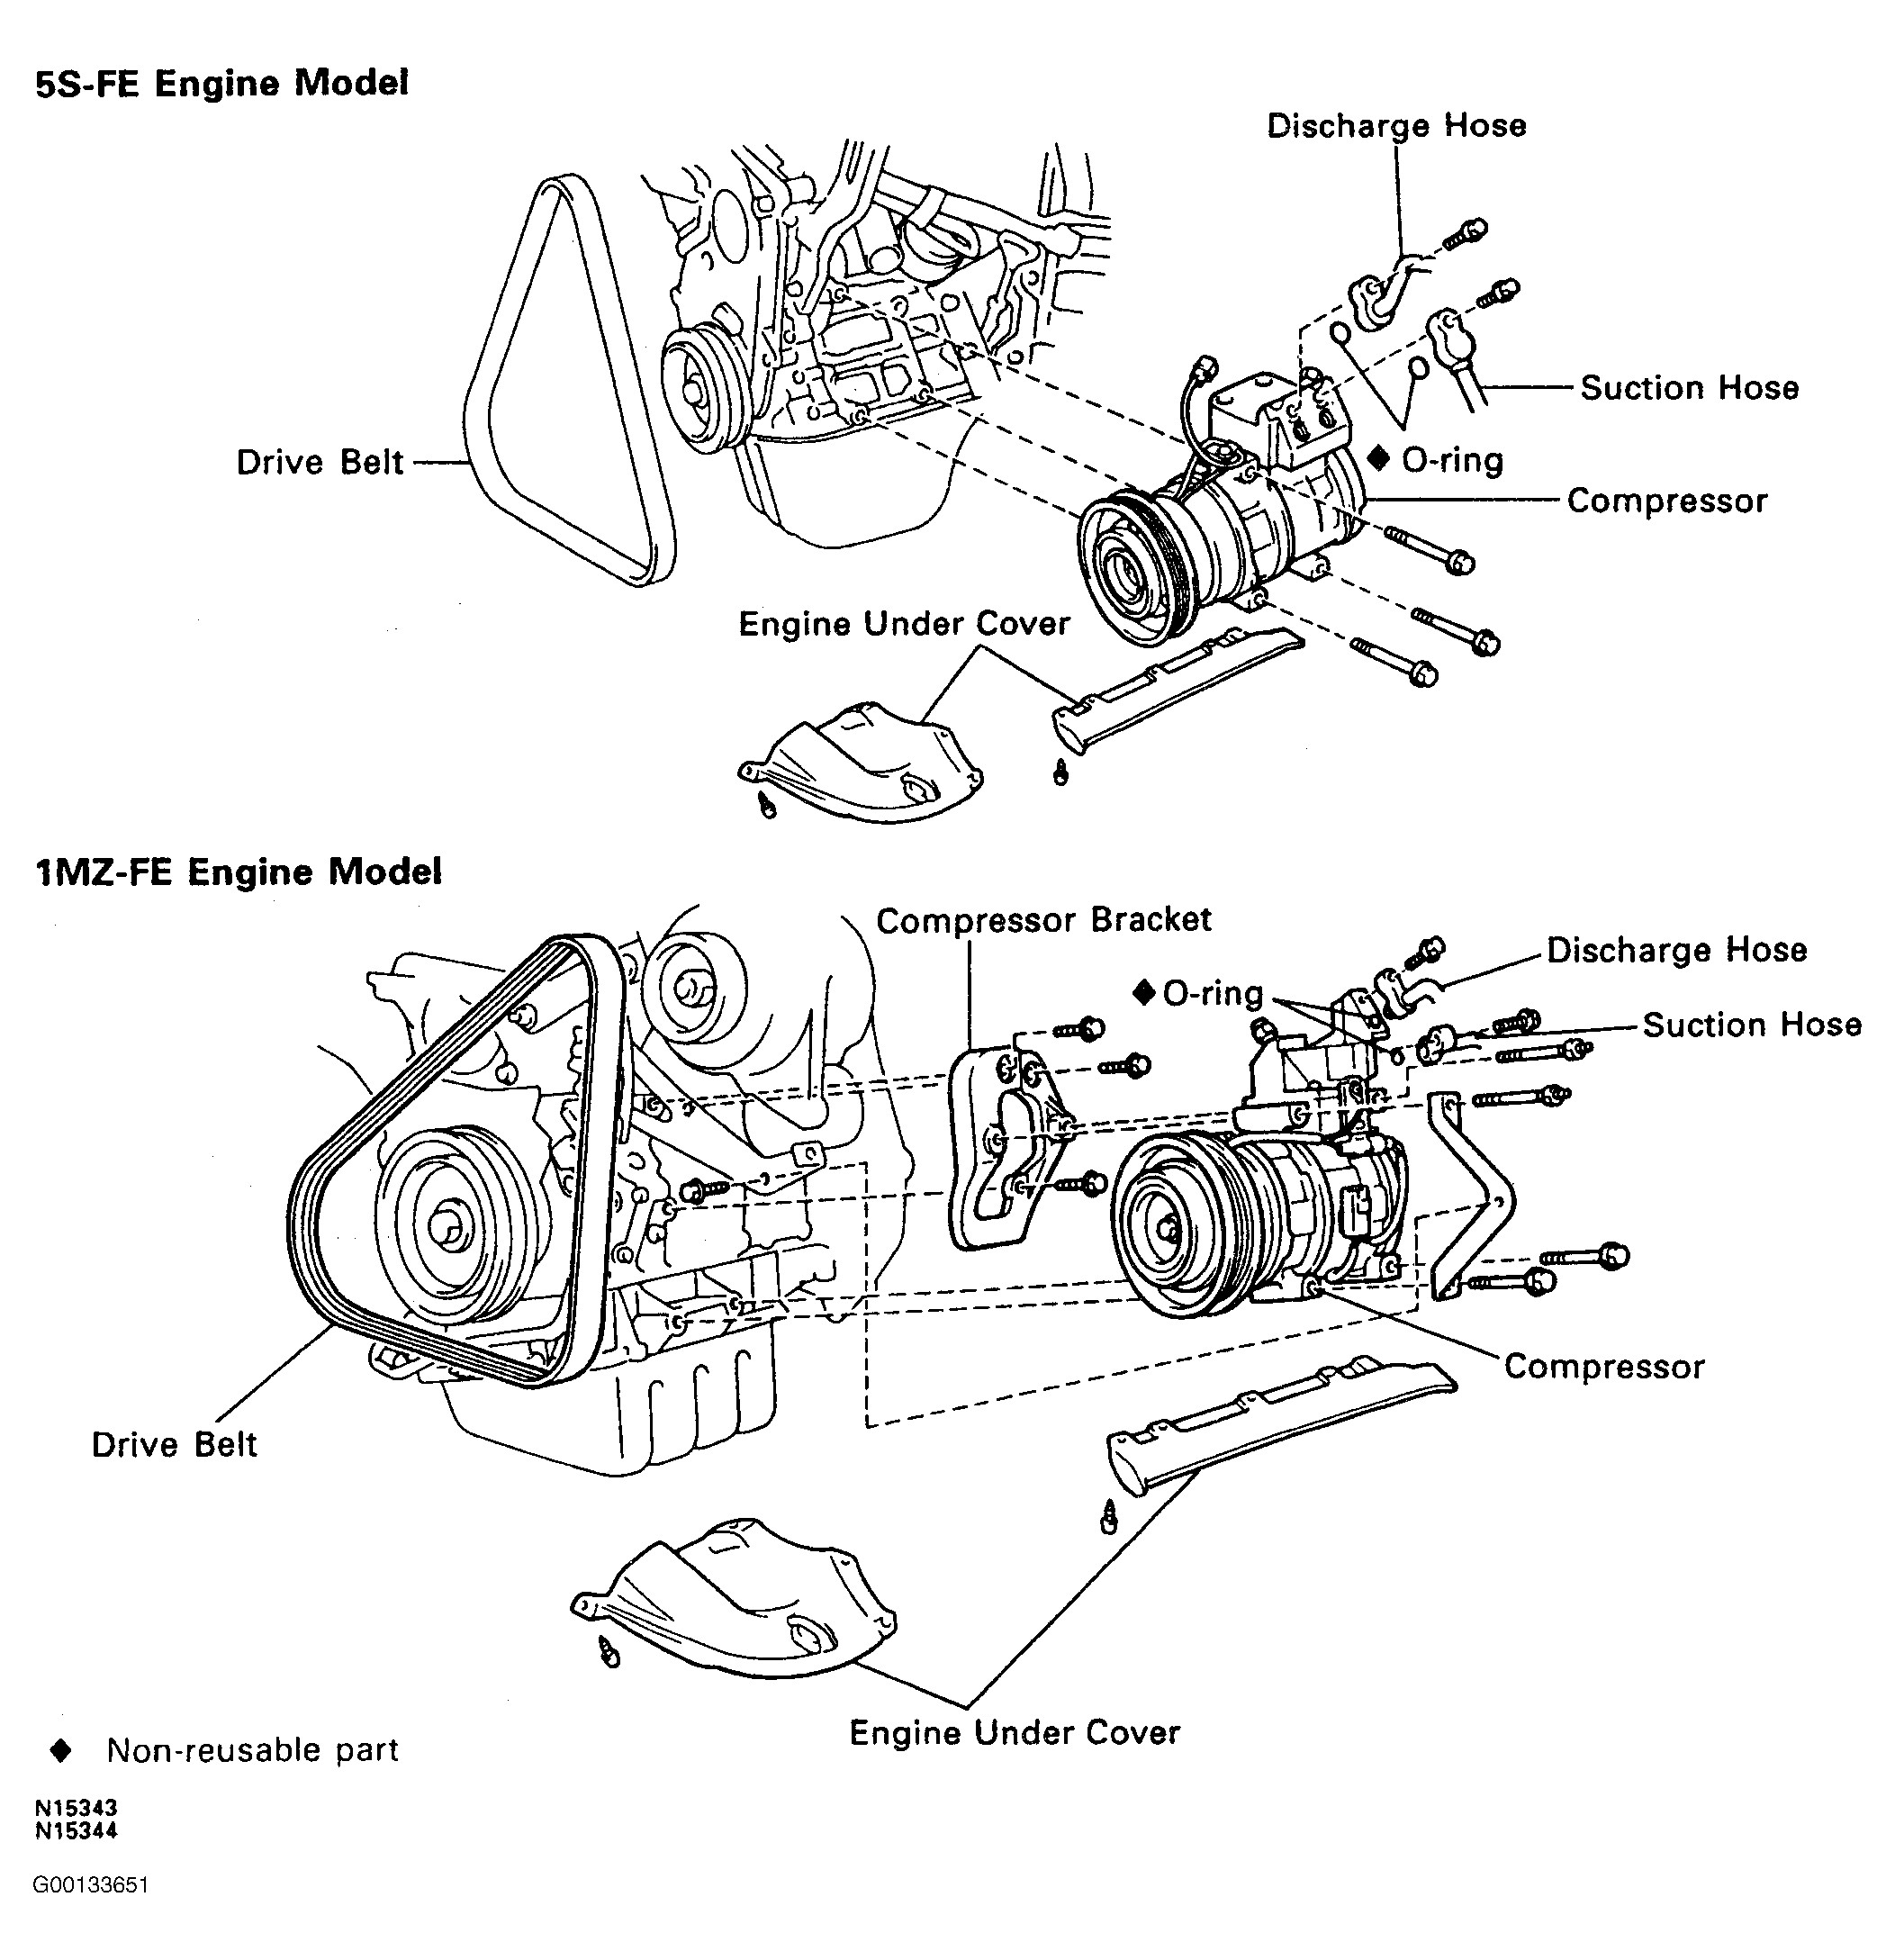 1995 Toyota Camry Wiring Diagrams from detoxicrecenze.com